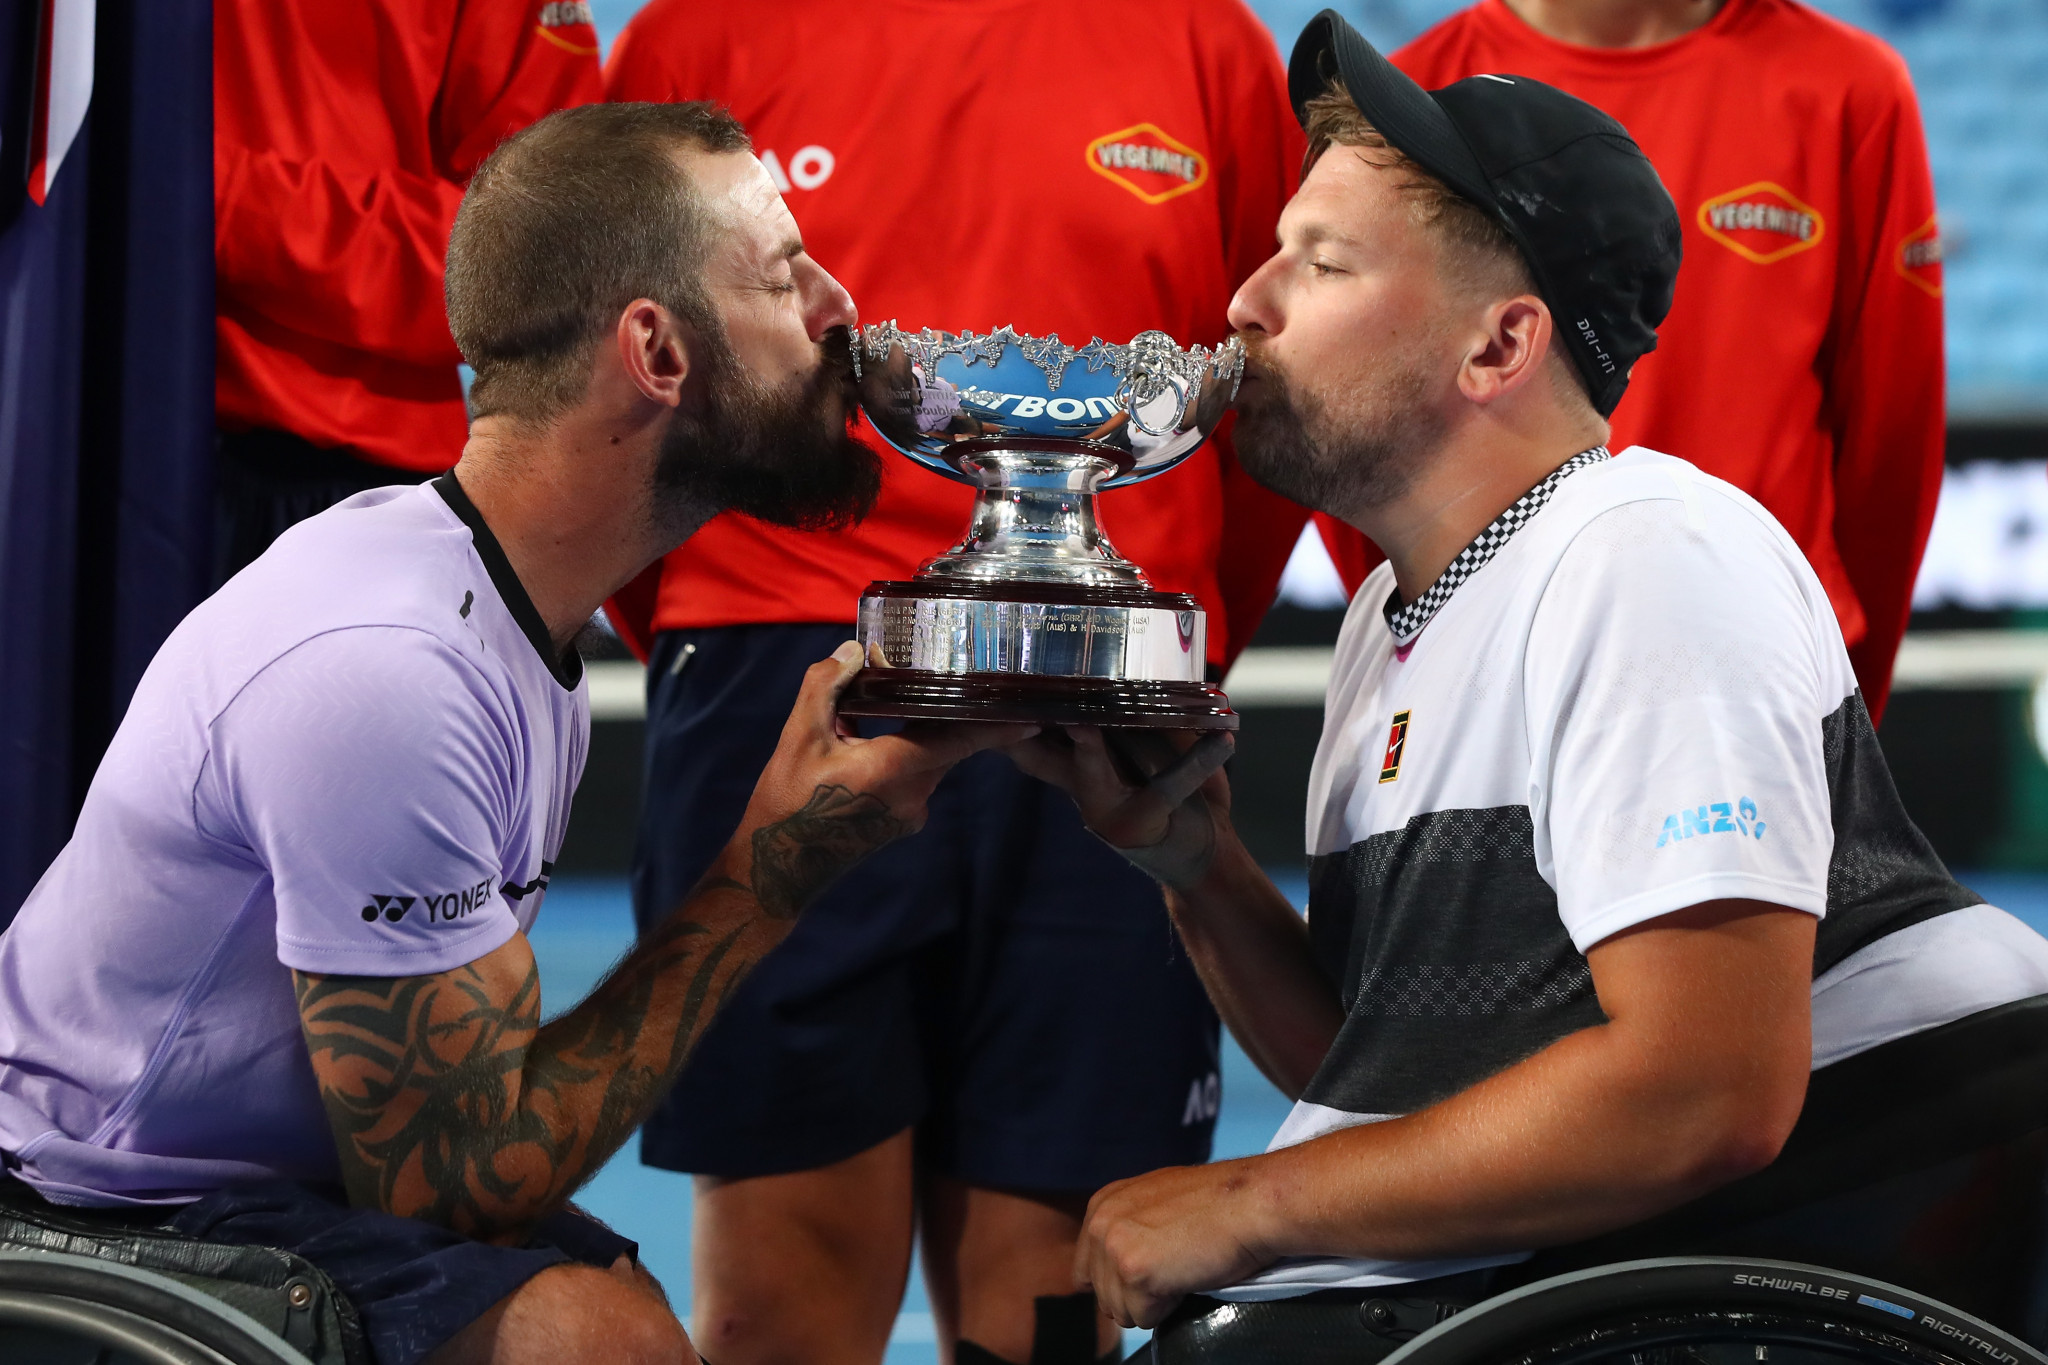 Dylan Alcott and Heath Davidson won the quad doubles title in a tense victory over Andy Lapthorne and David Wagner ©Getty Images